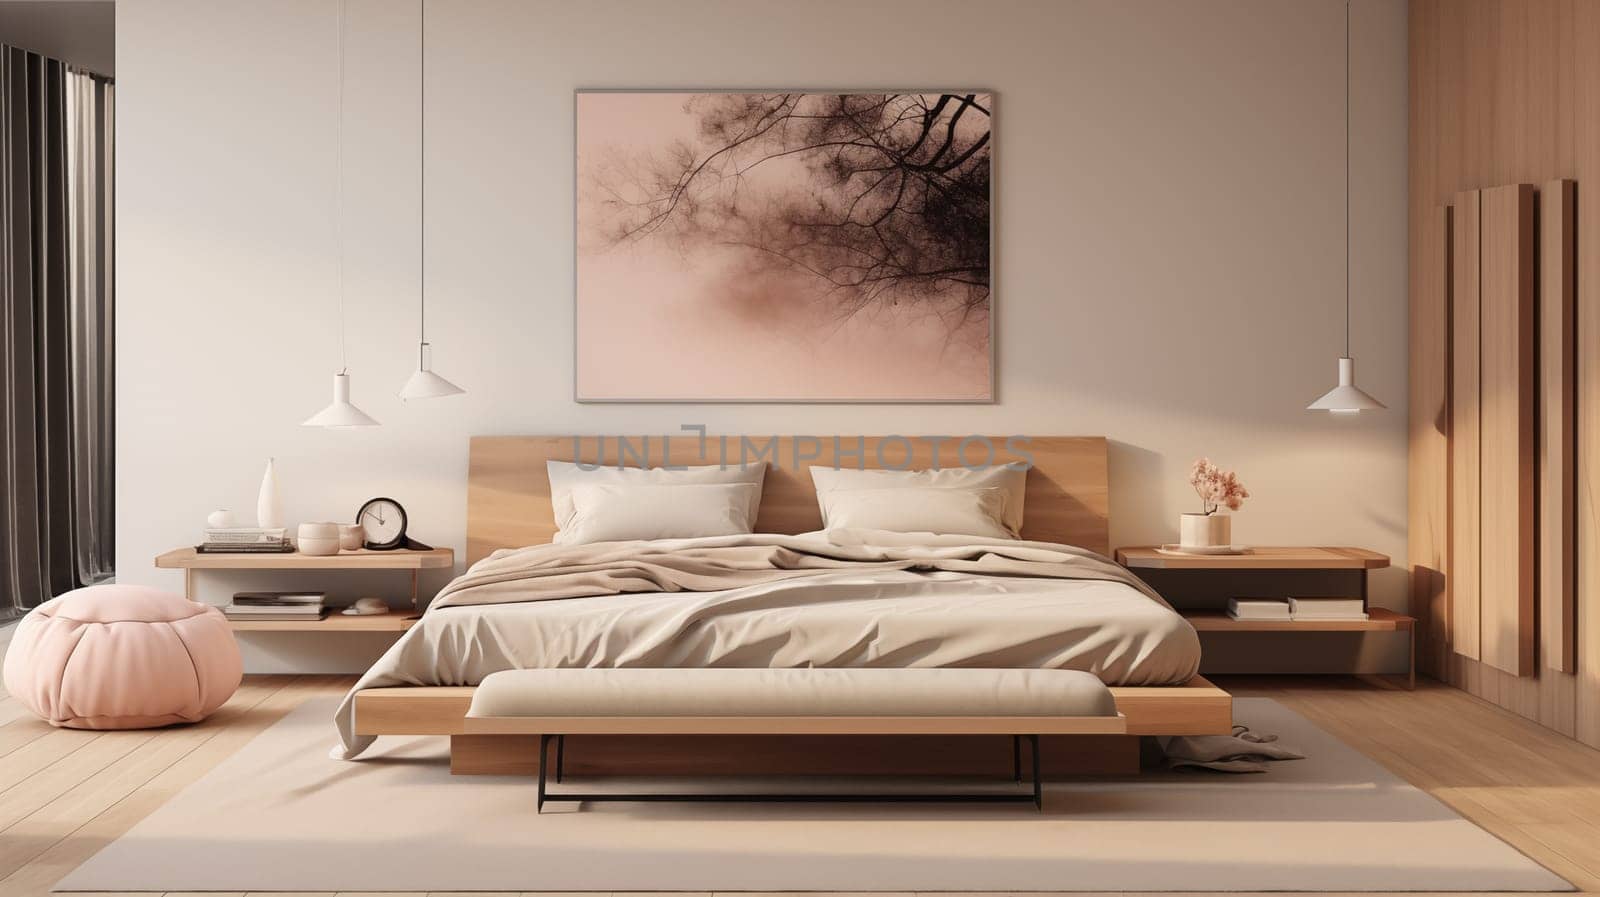 Elegant bedroom interior with natural wood furniture, soft lighting, and a large abstract art piece.